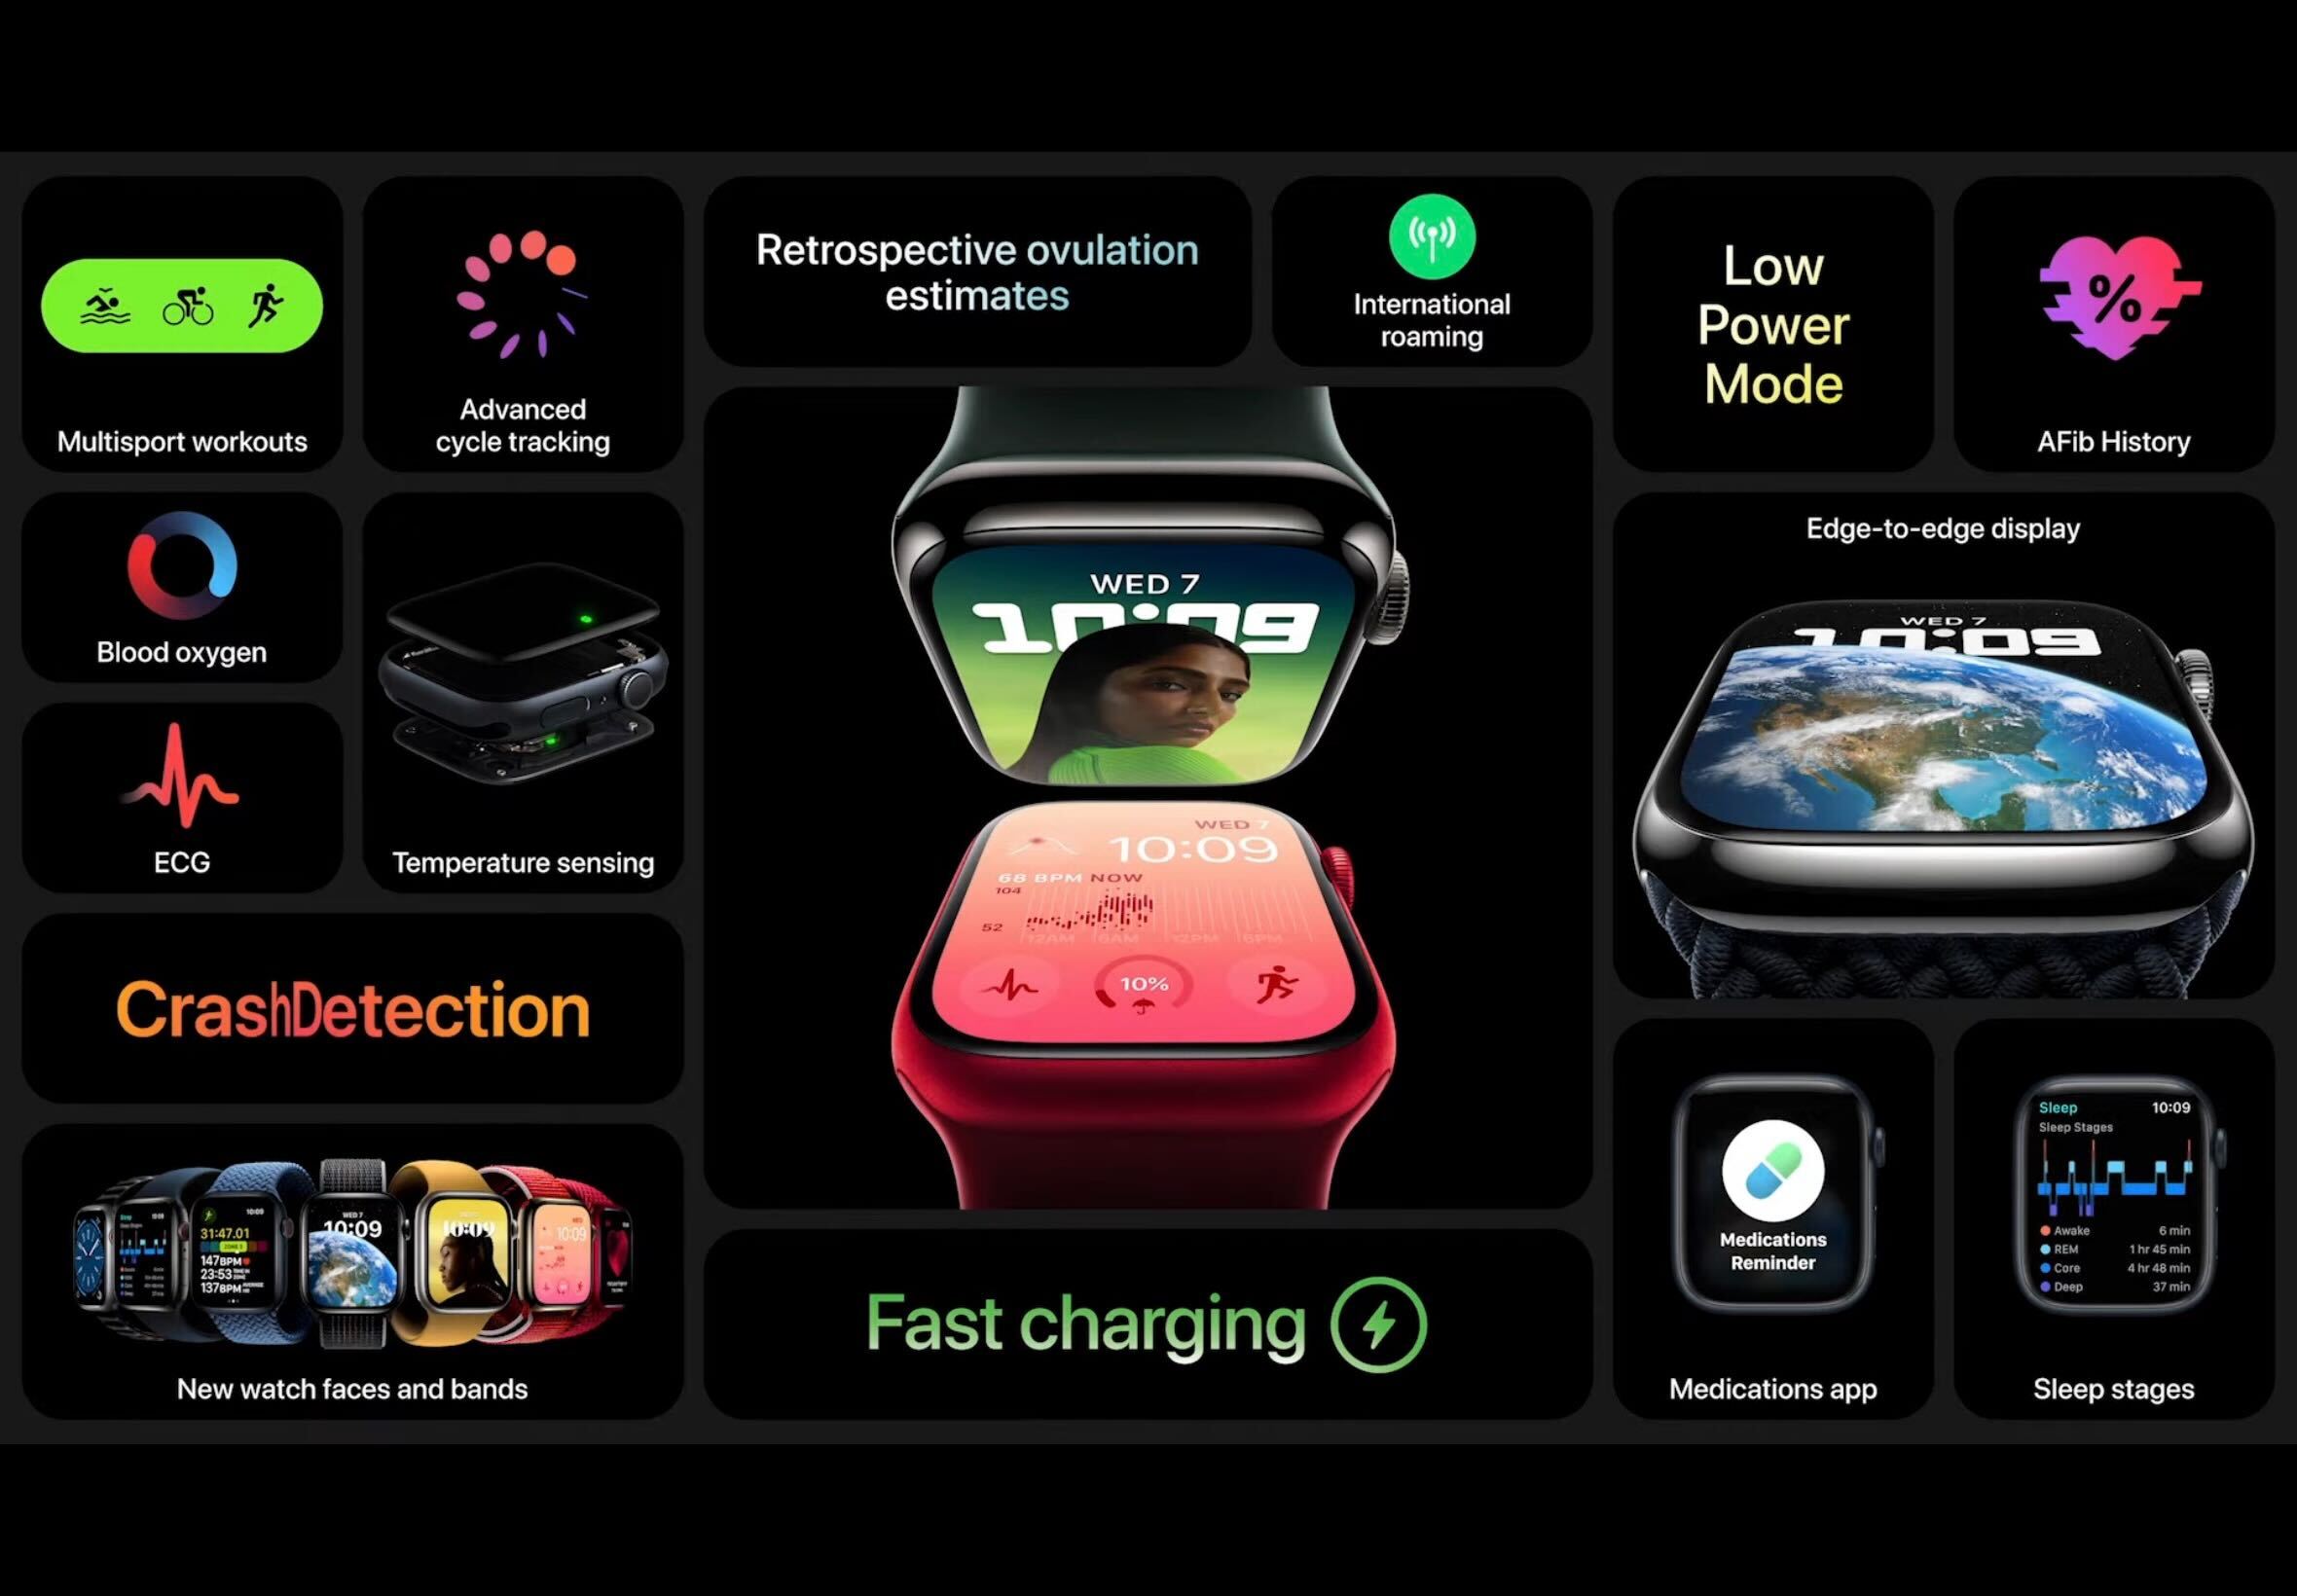 Apple Watch Series 8 adds advanced ovulation features as well as new sensors that can detect car crashes.